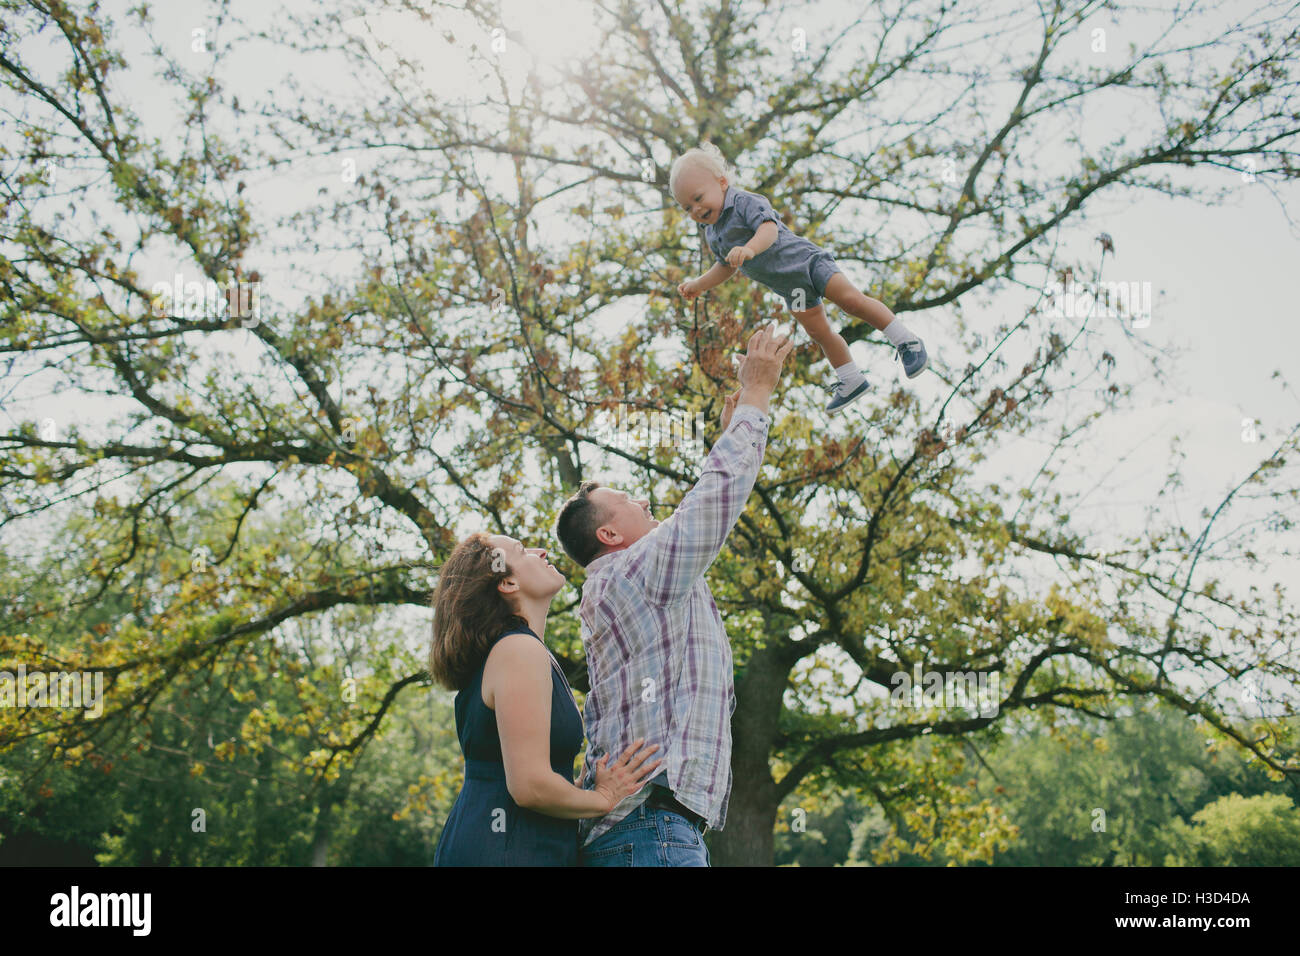 Cheerful man with wife throwing son in air Stock Photo